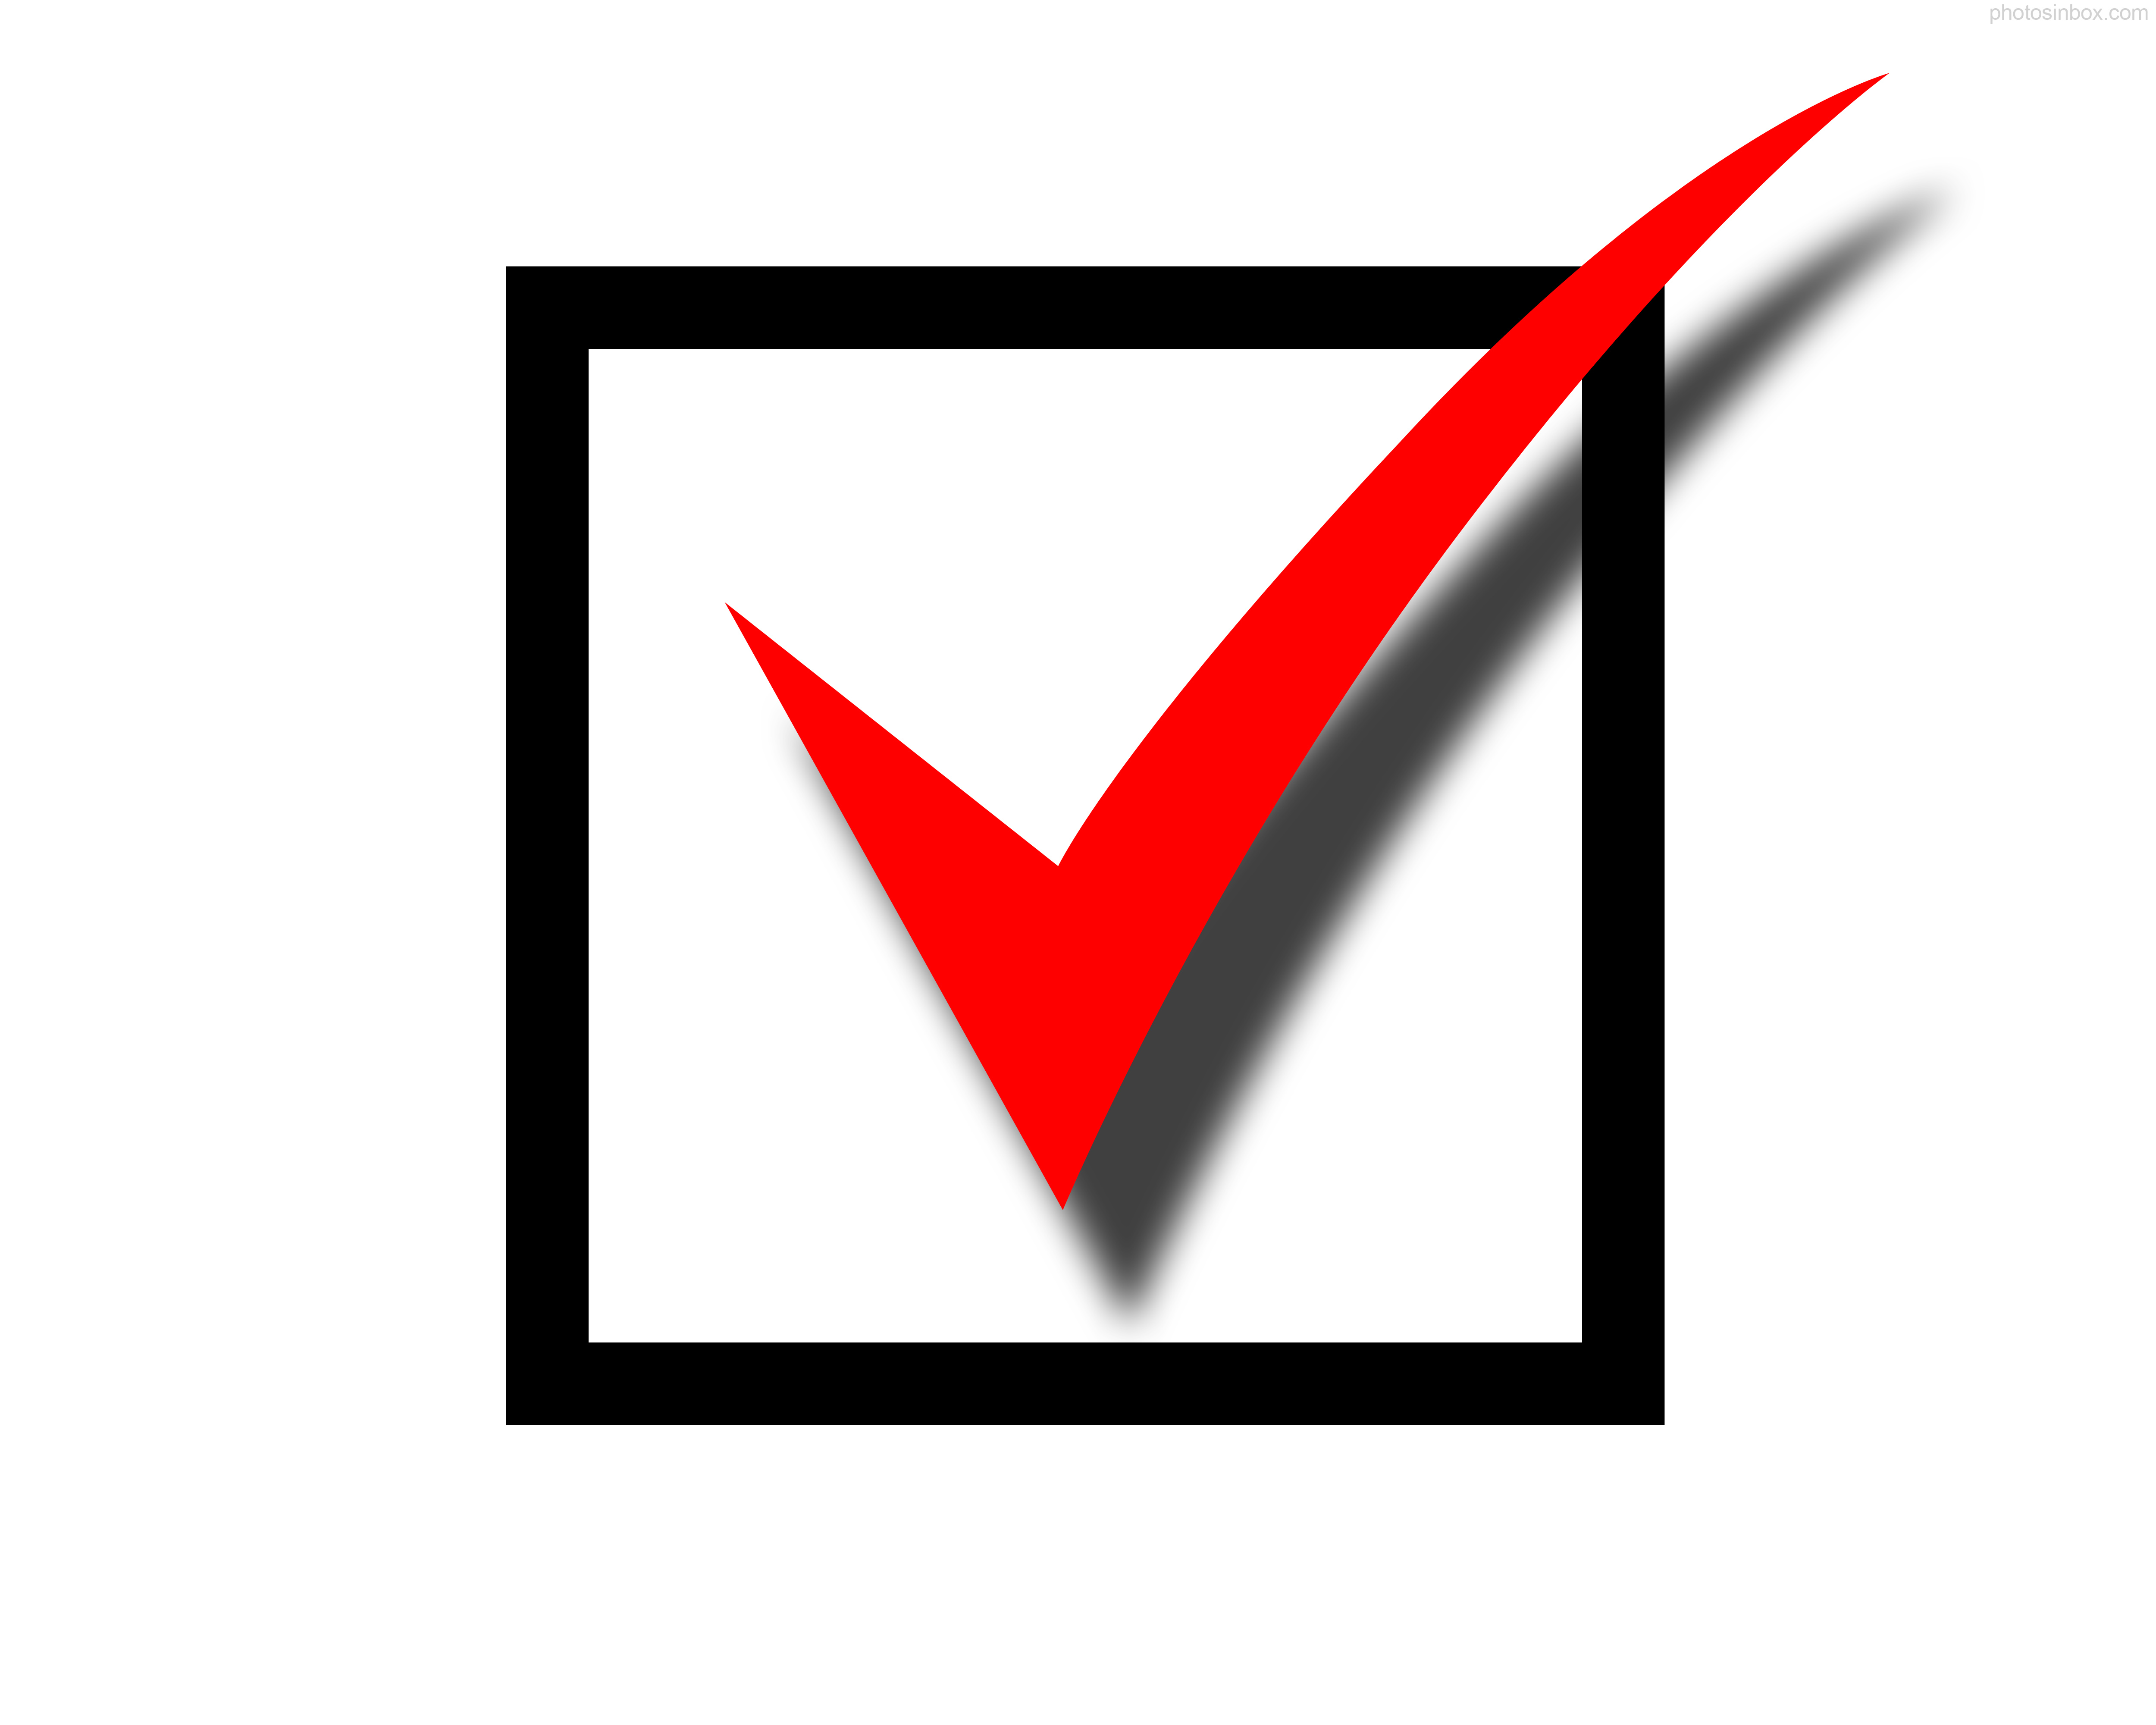 Red Check Mark Symbol clipart free image.